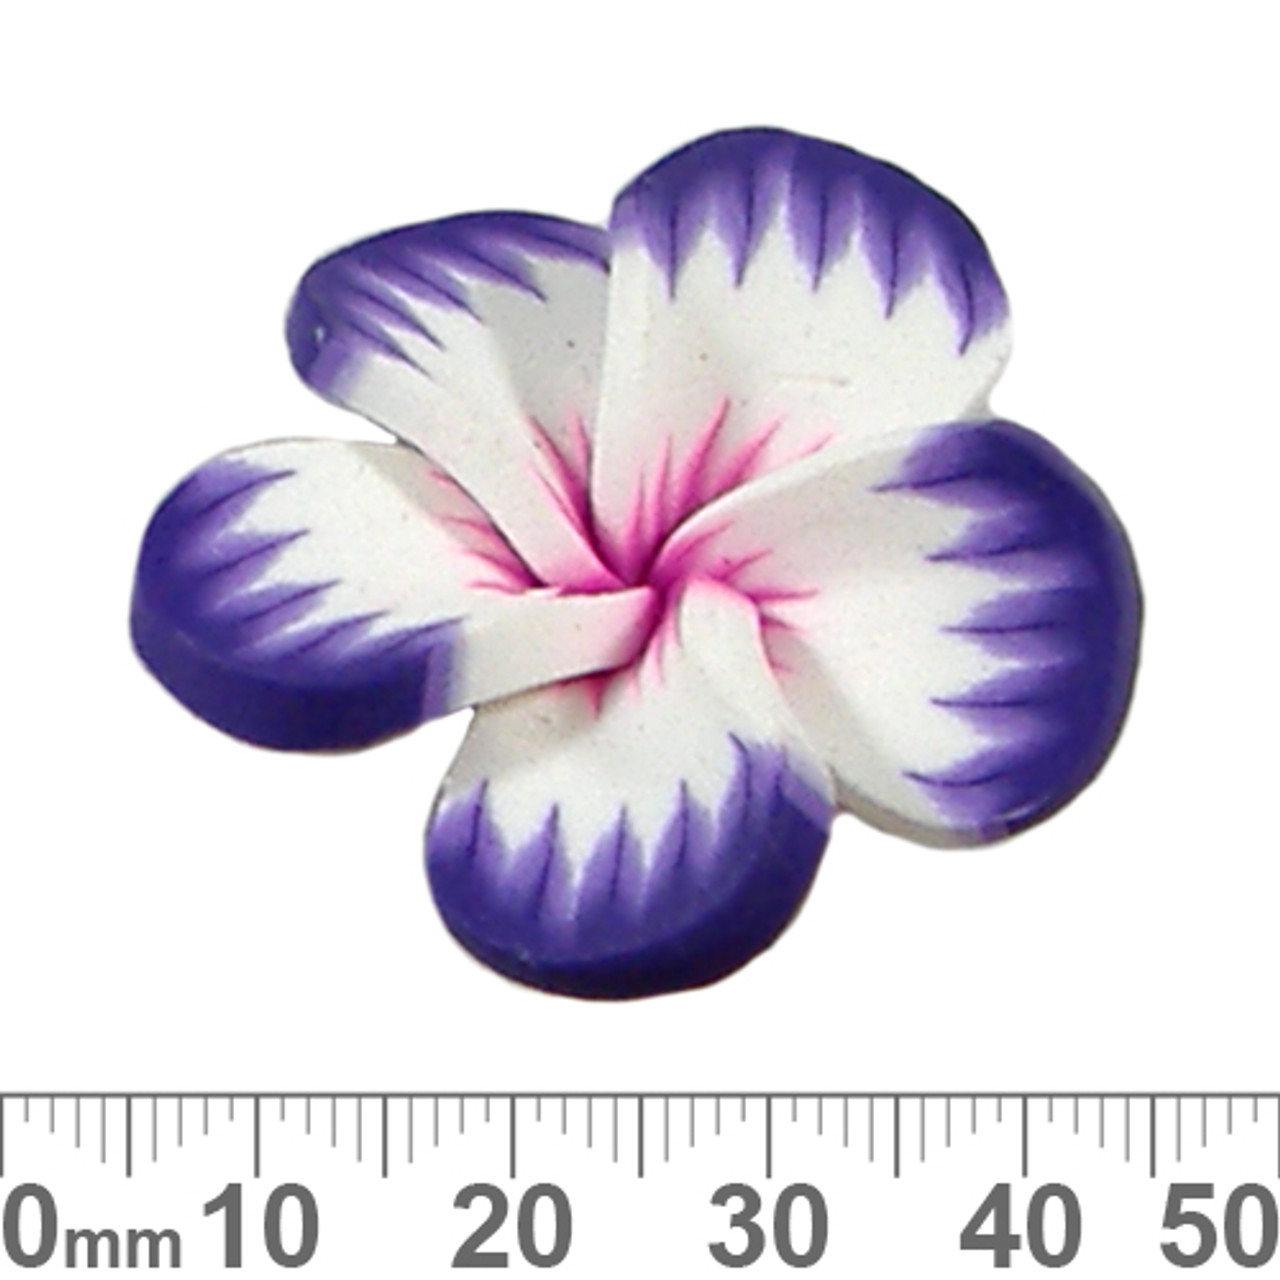 4, 20 or 50 Pieces: Silver Hibiscus Hawaiian Flower Charms